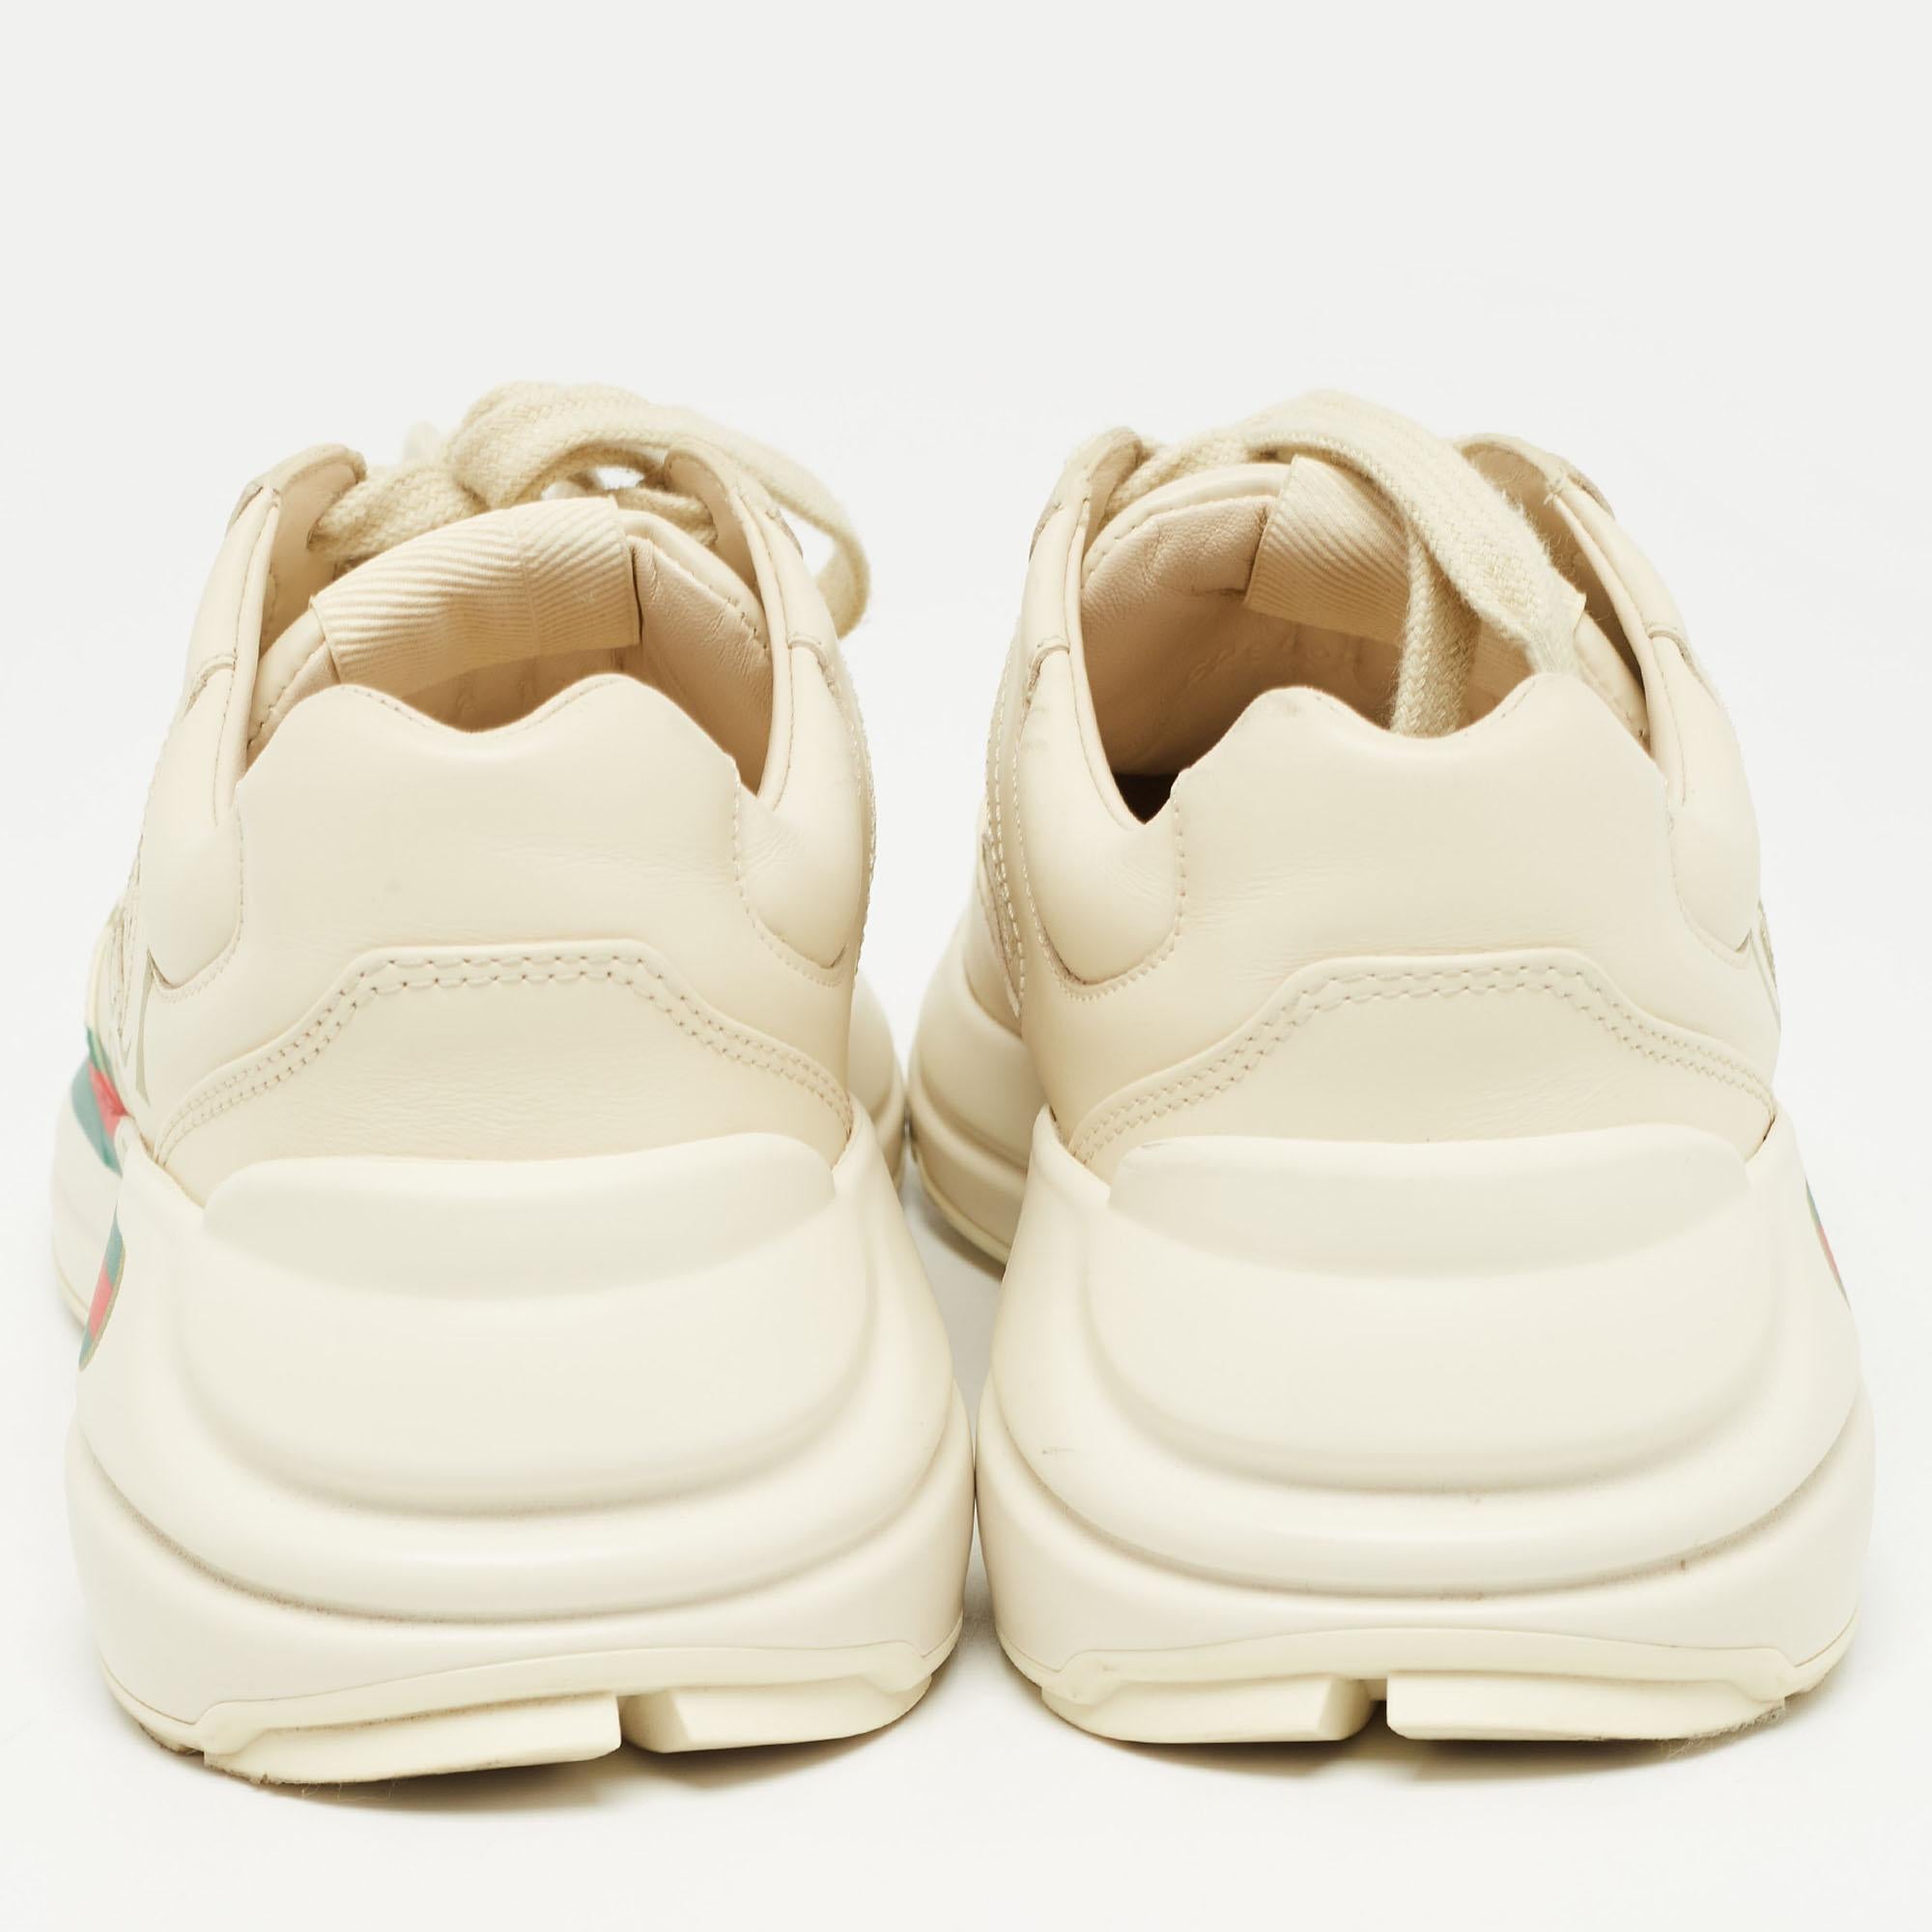 Gucci Cream Leather Rhyton Sneakers Size 35.5 1